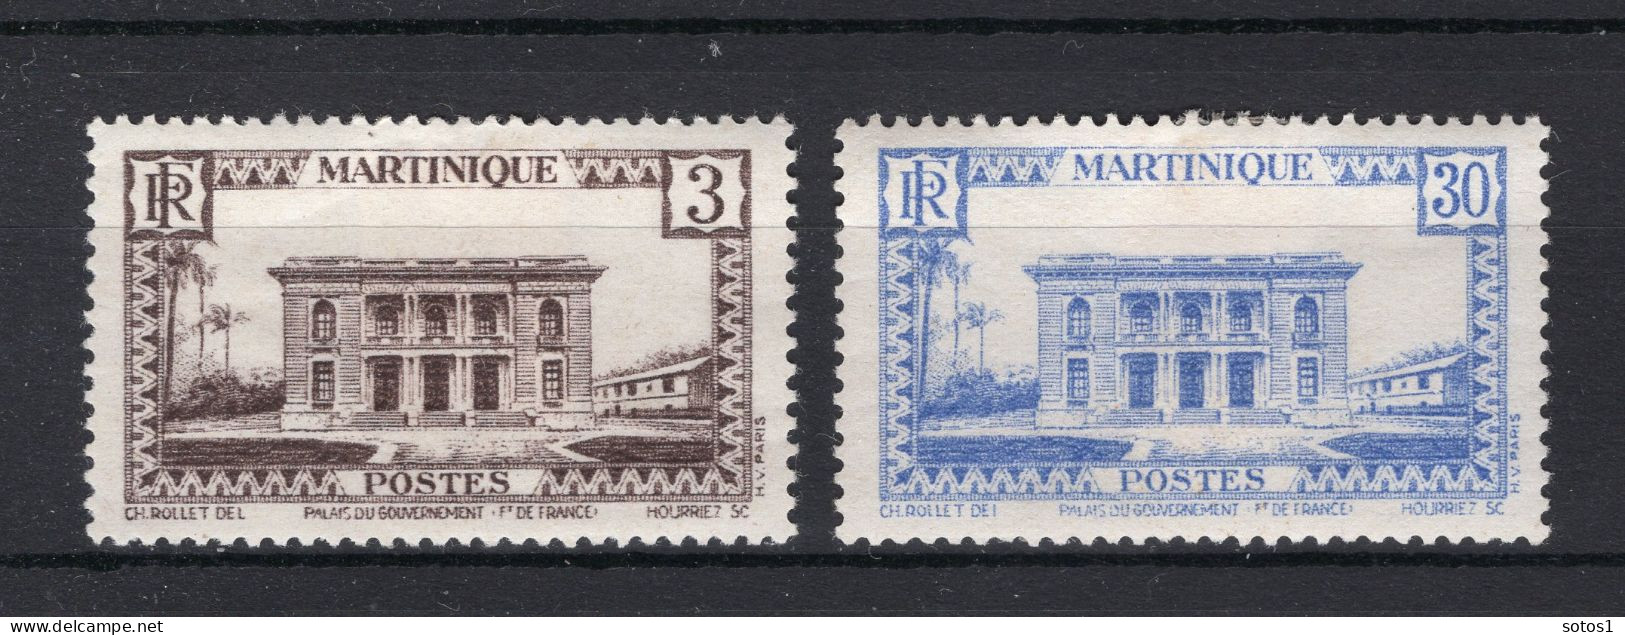 MARTINIQUE Yt. 175/176 MH 1939-1940 - Unused Stamps